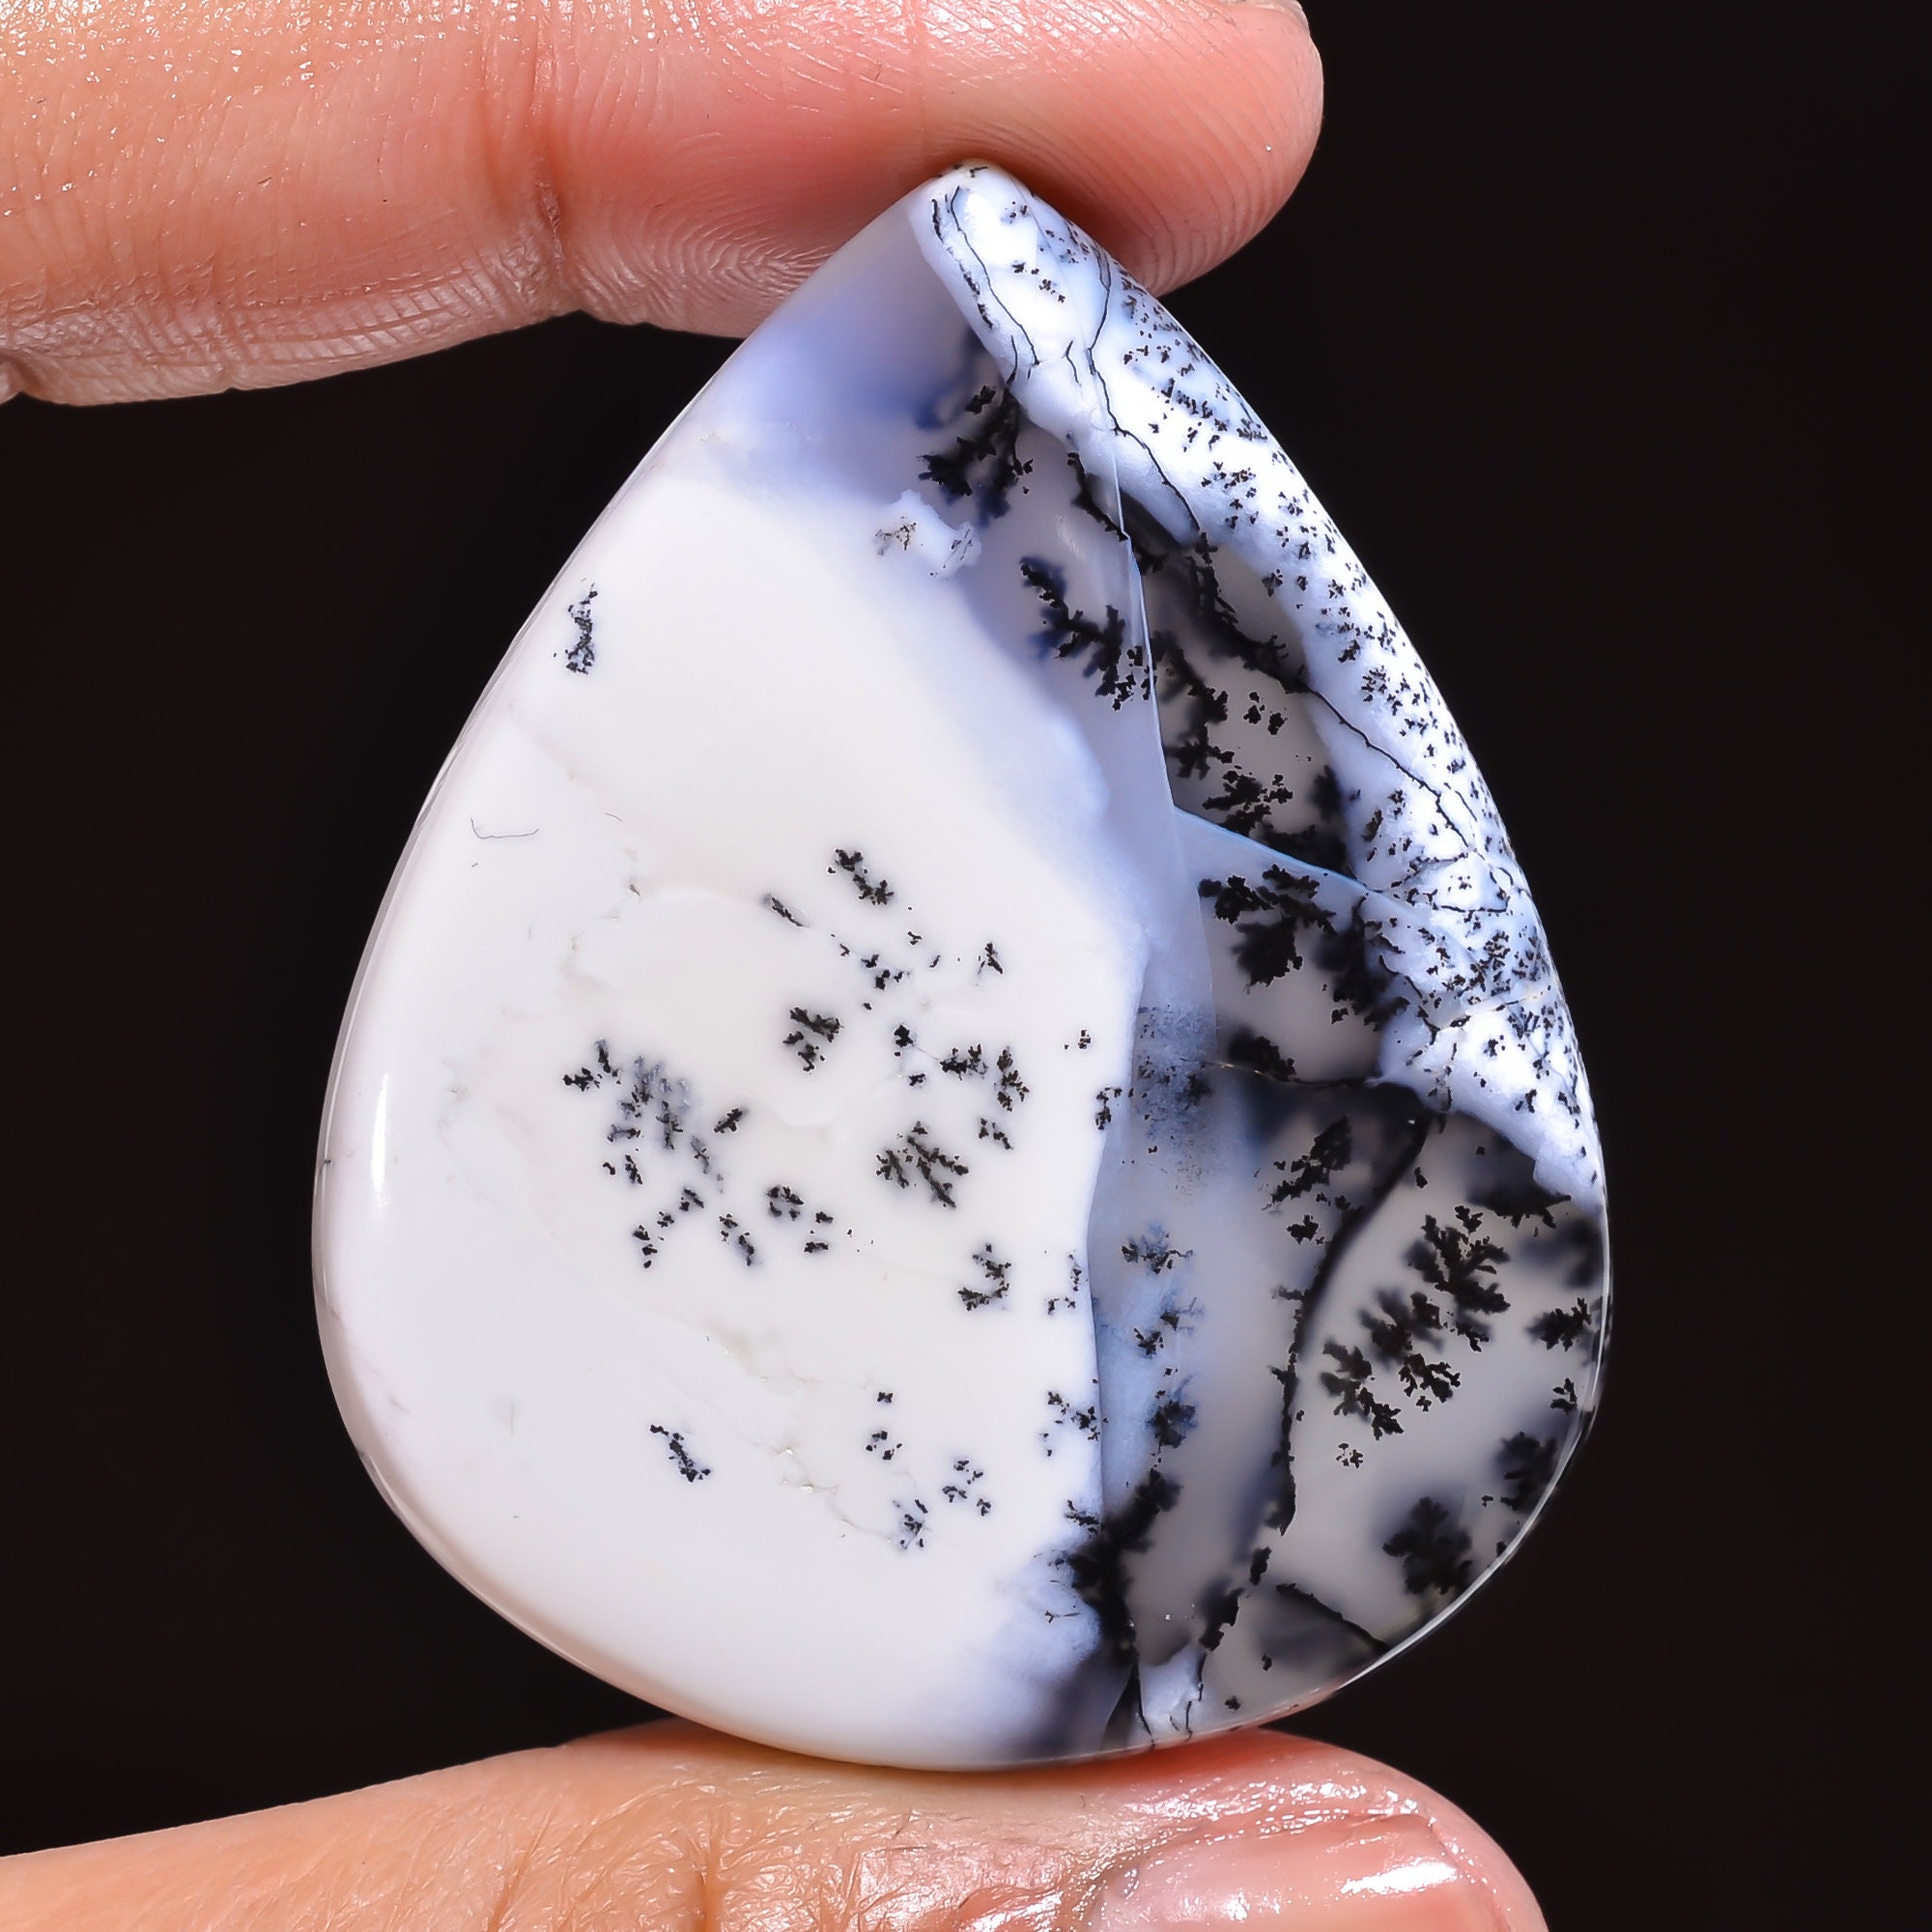 39X22X7 mm HM-1284 Dazzling Top Grade Quality 100% Natural Dendrite Opal Pear Shape Cabochon Loose Gemstone For Making Jewelry 38.5 Ct